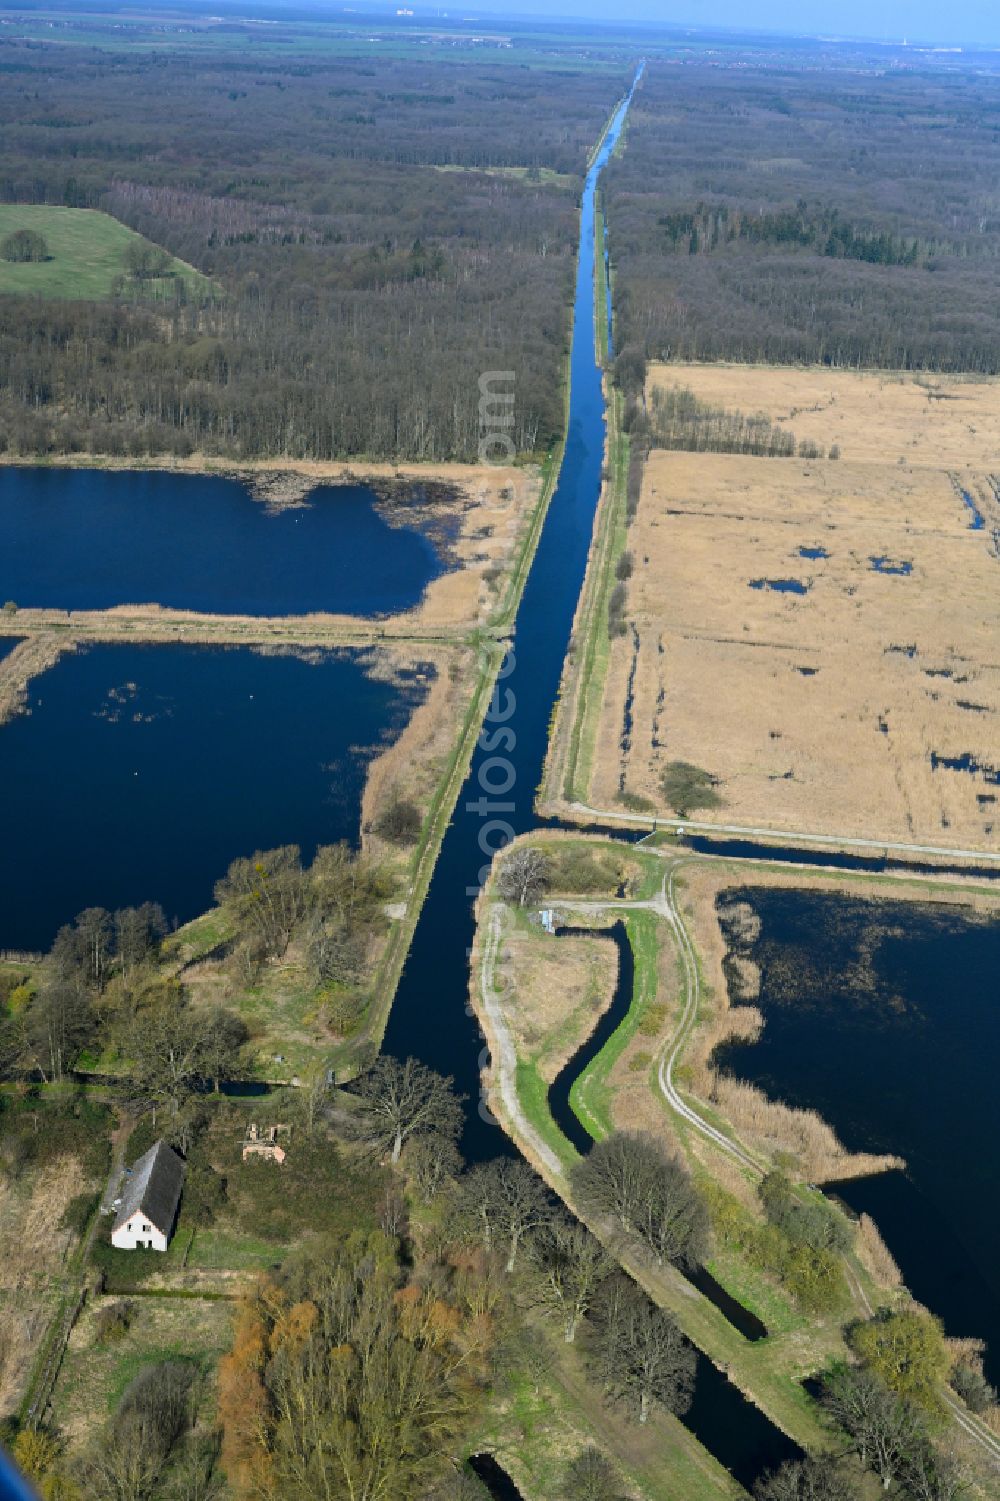 Göhren from above - Canal course and shore areas of the connecting canal Stoerwasserstrasse in Goehren in the state Mecklenburg - Western Pomerania, Germany